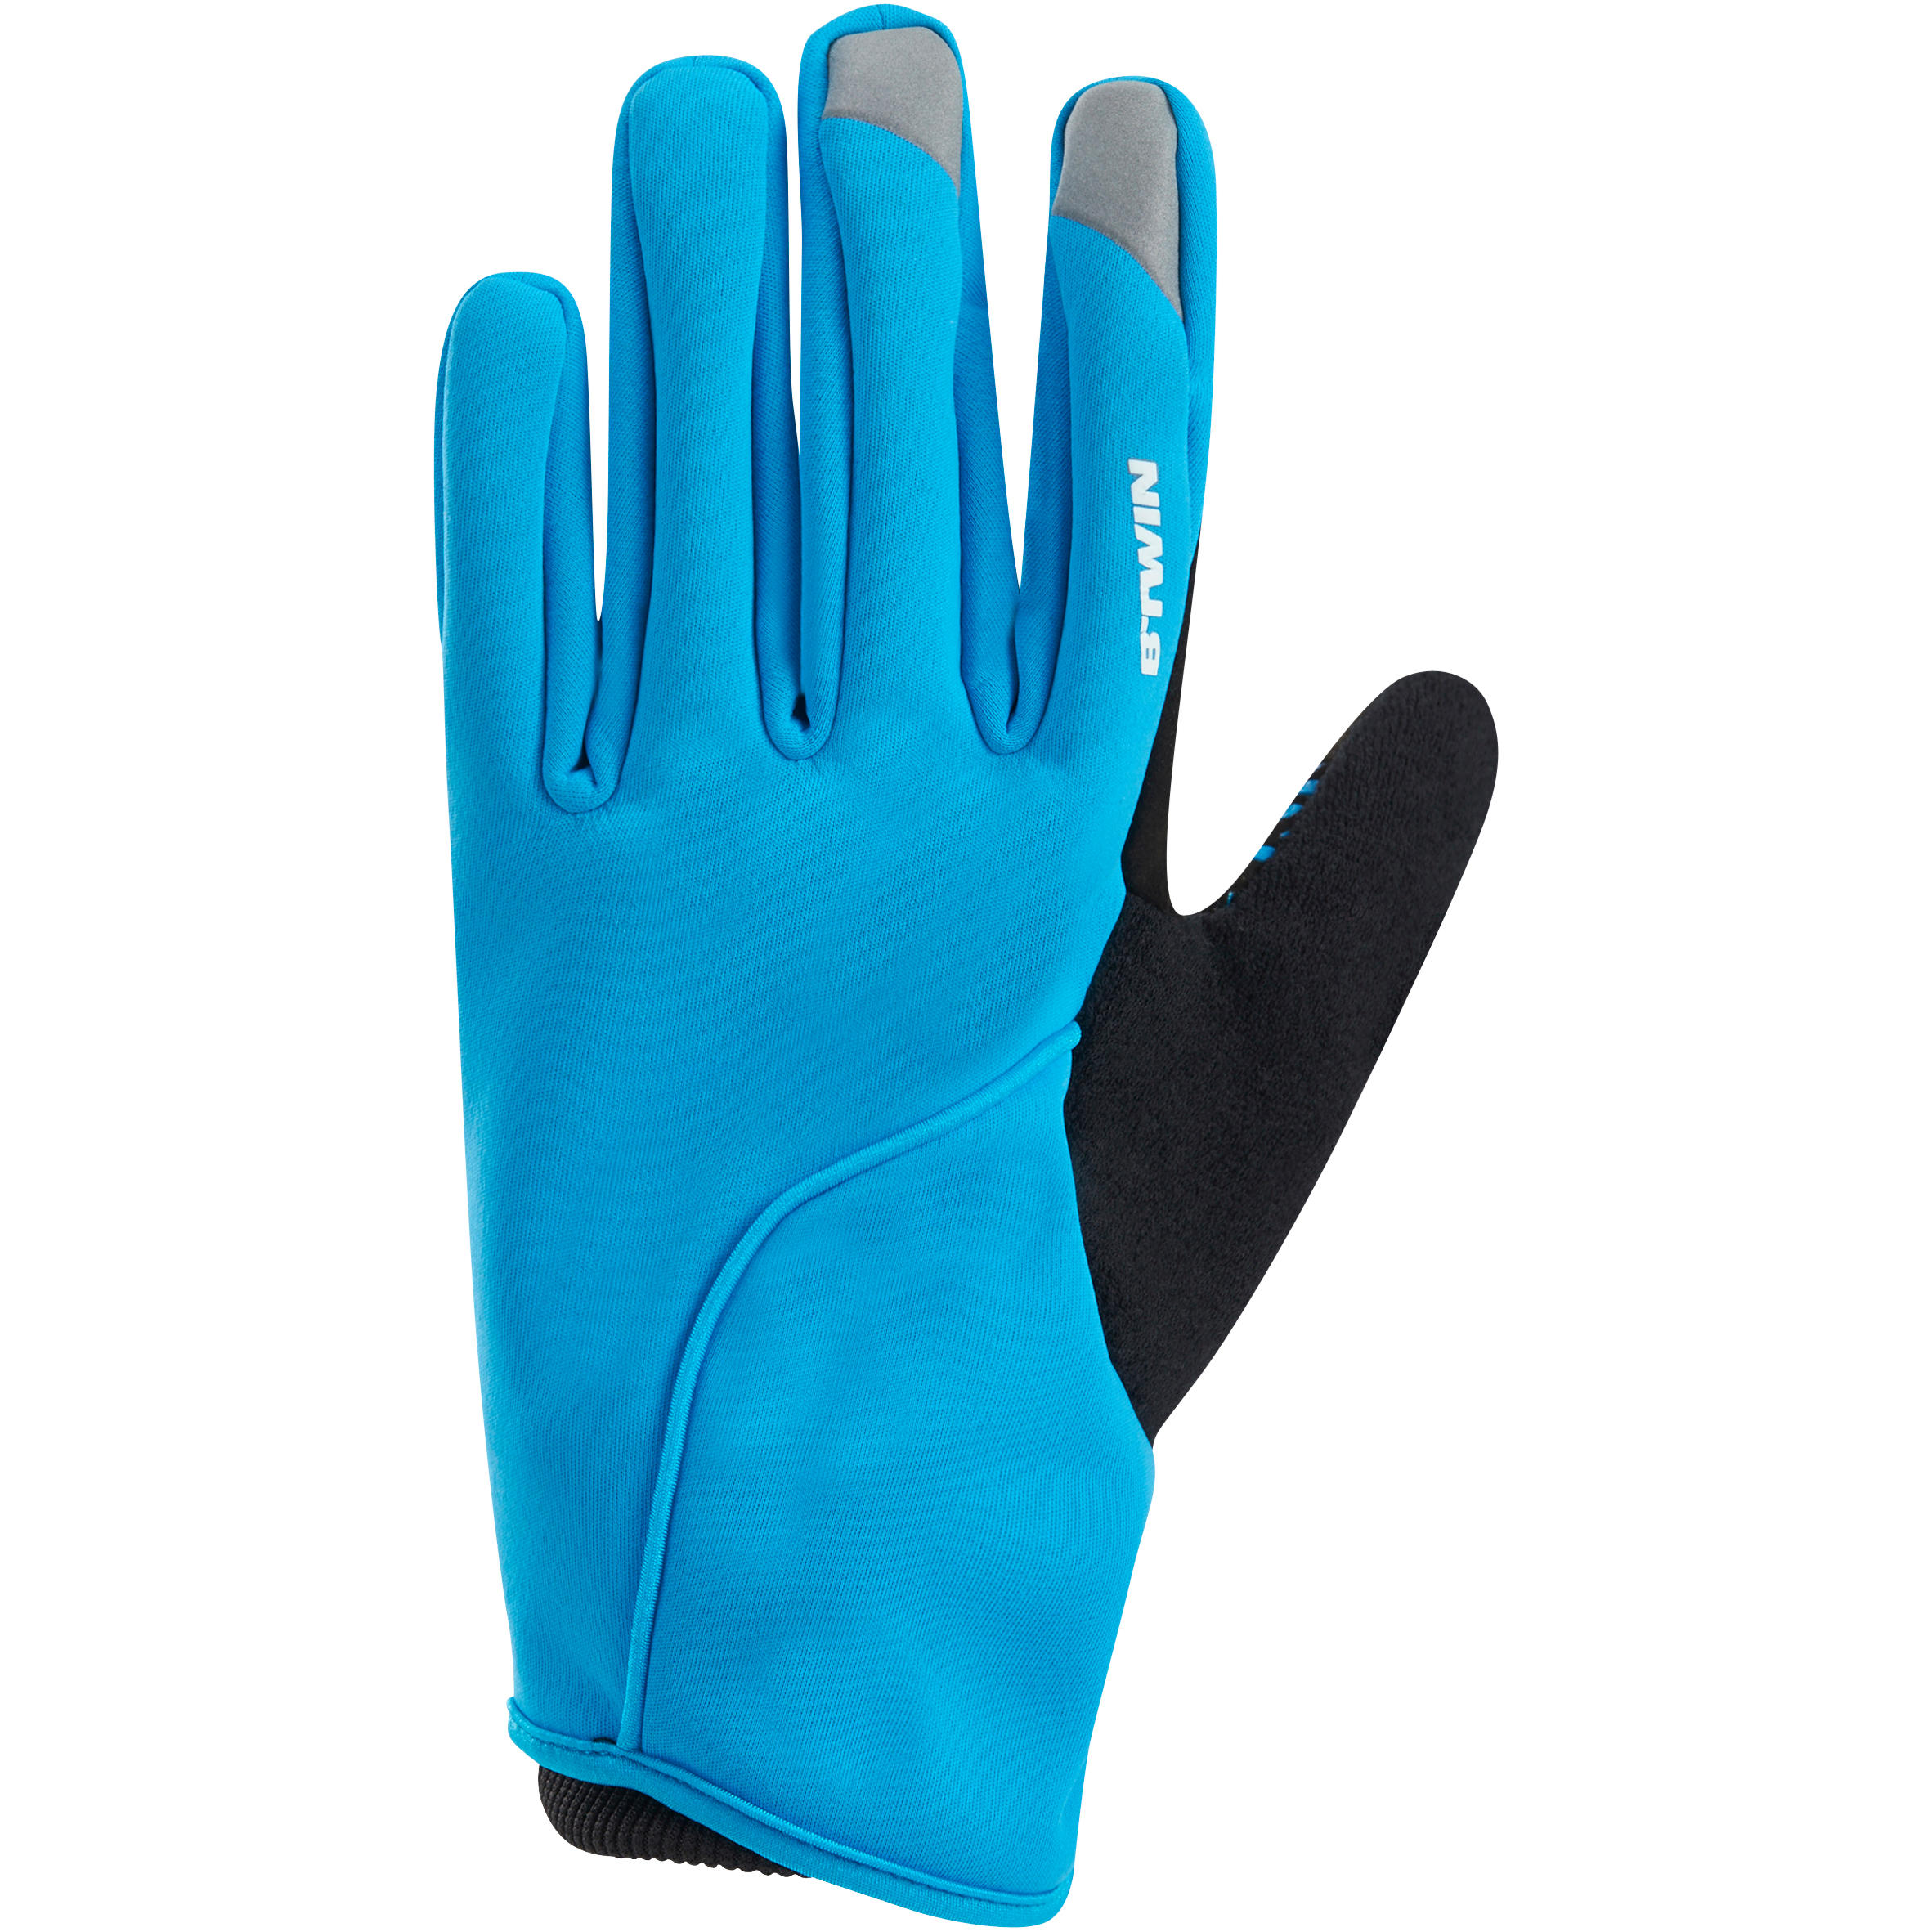 TRIBAN 500 Winter Cycling Gloves - Blue